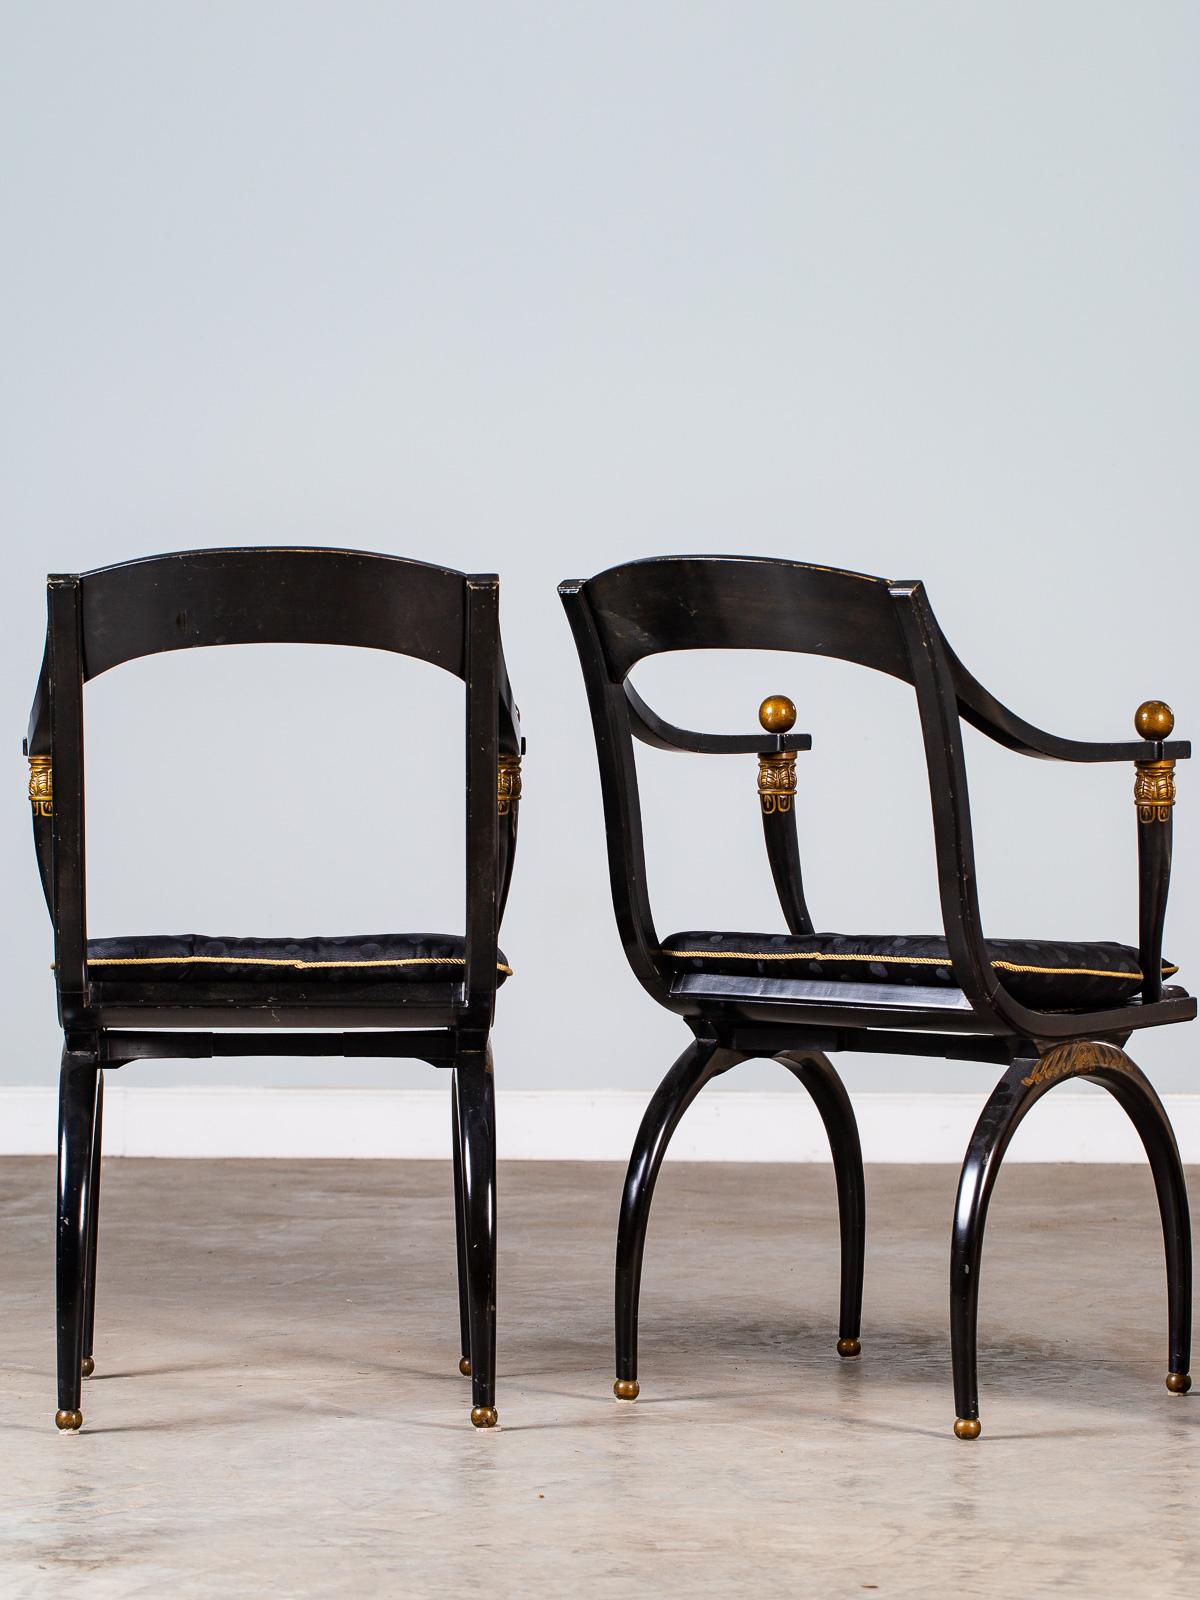 Pair of Vintage French Empire Chapuis Ebonized Gilt Chairs, circa 1950 For Sale 8